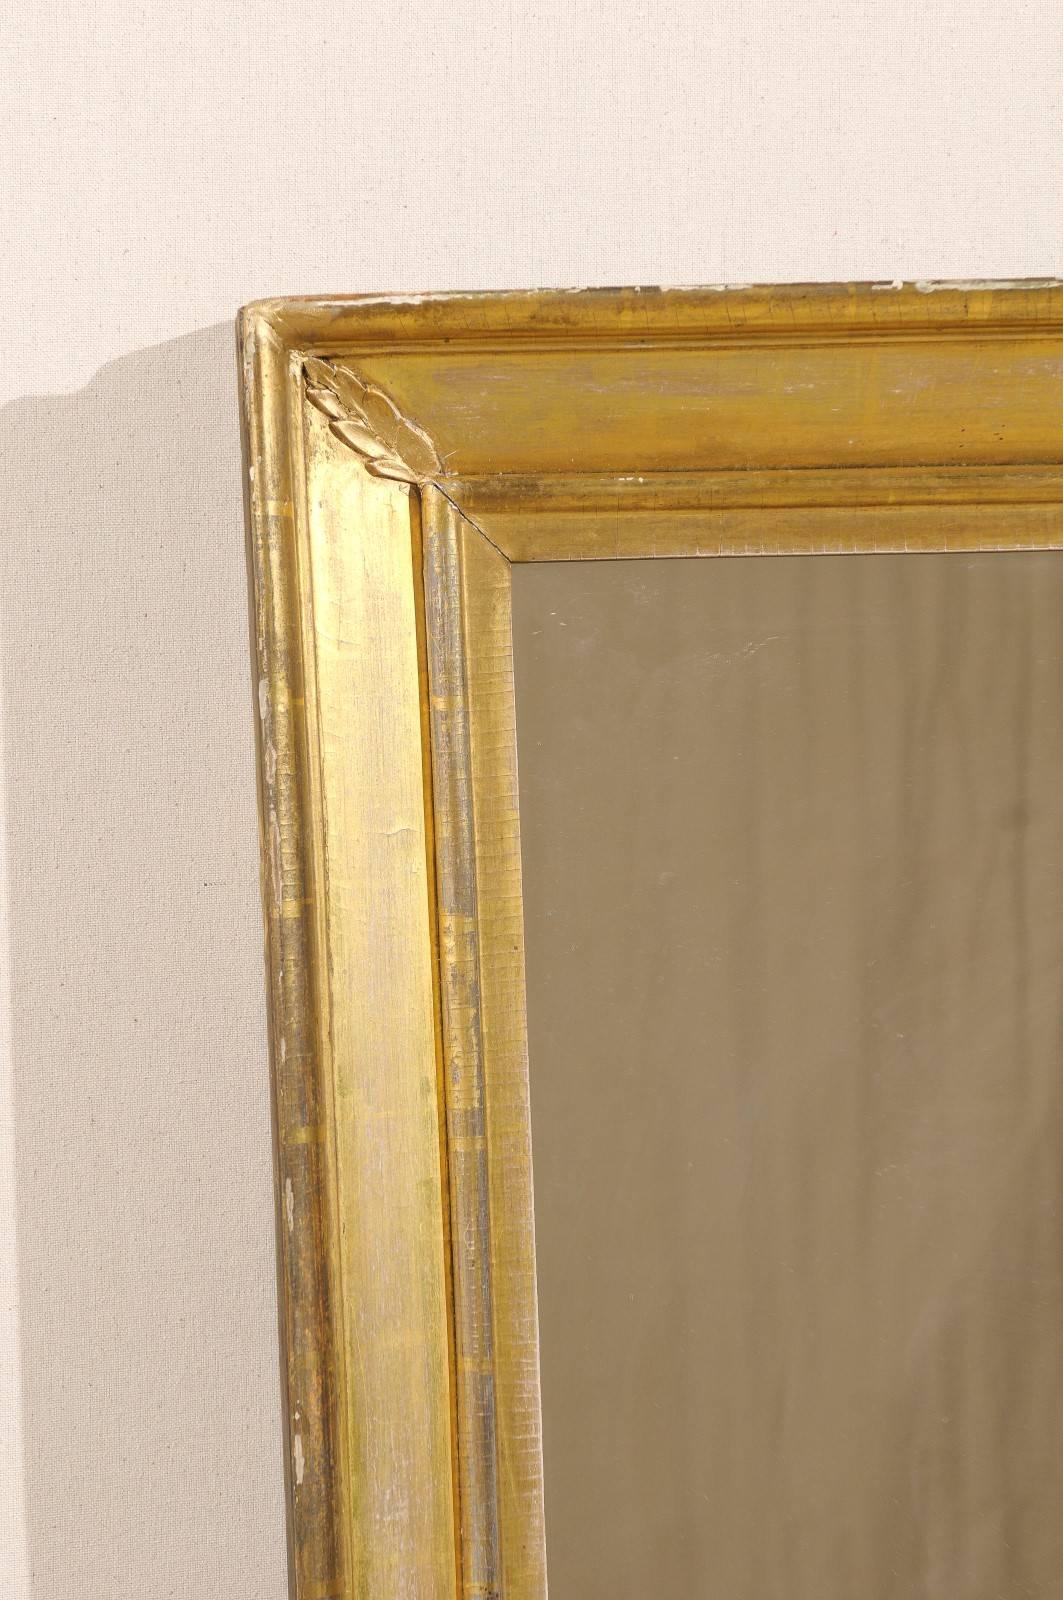 19th Century French Gilt Wood Mirror with Diagonal Leaf Motifs and Gold Color 2